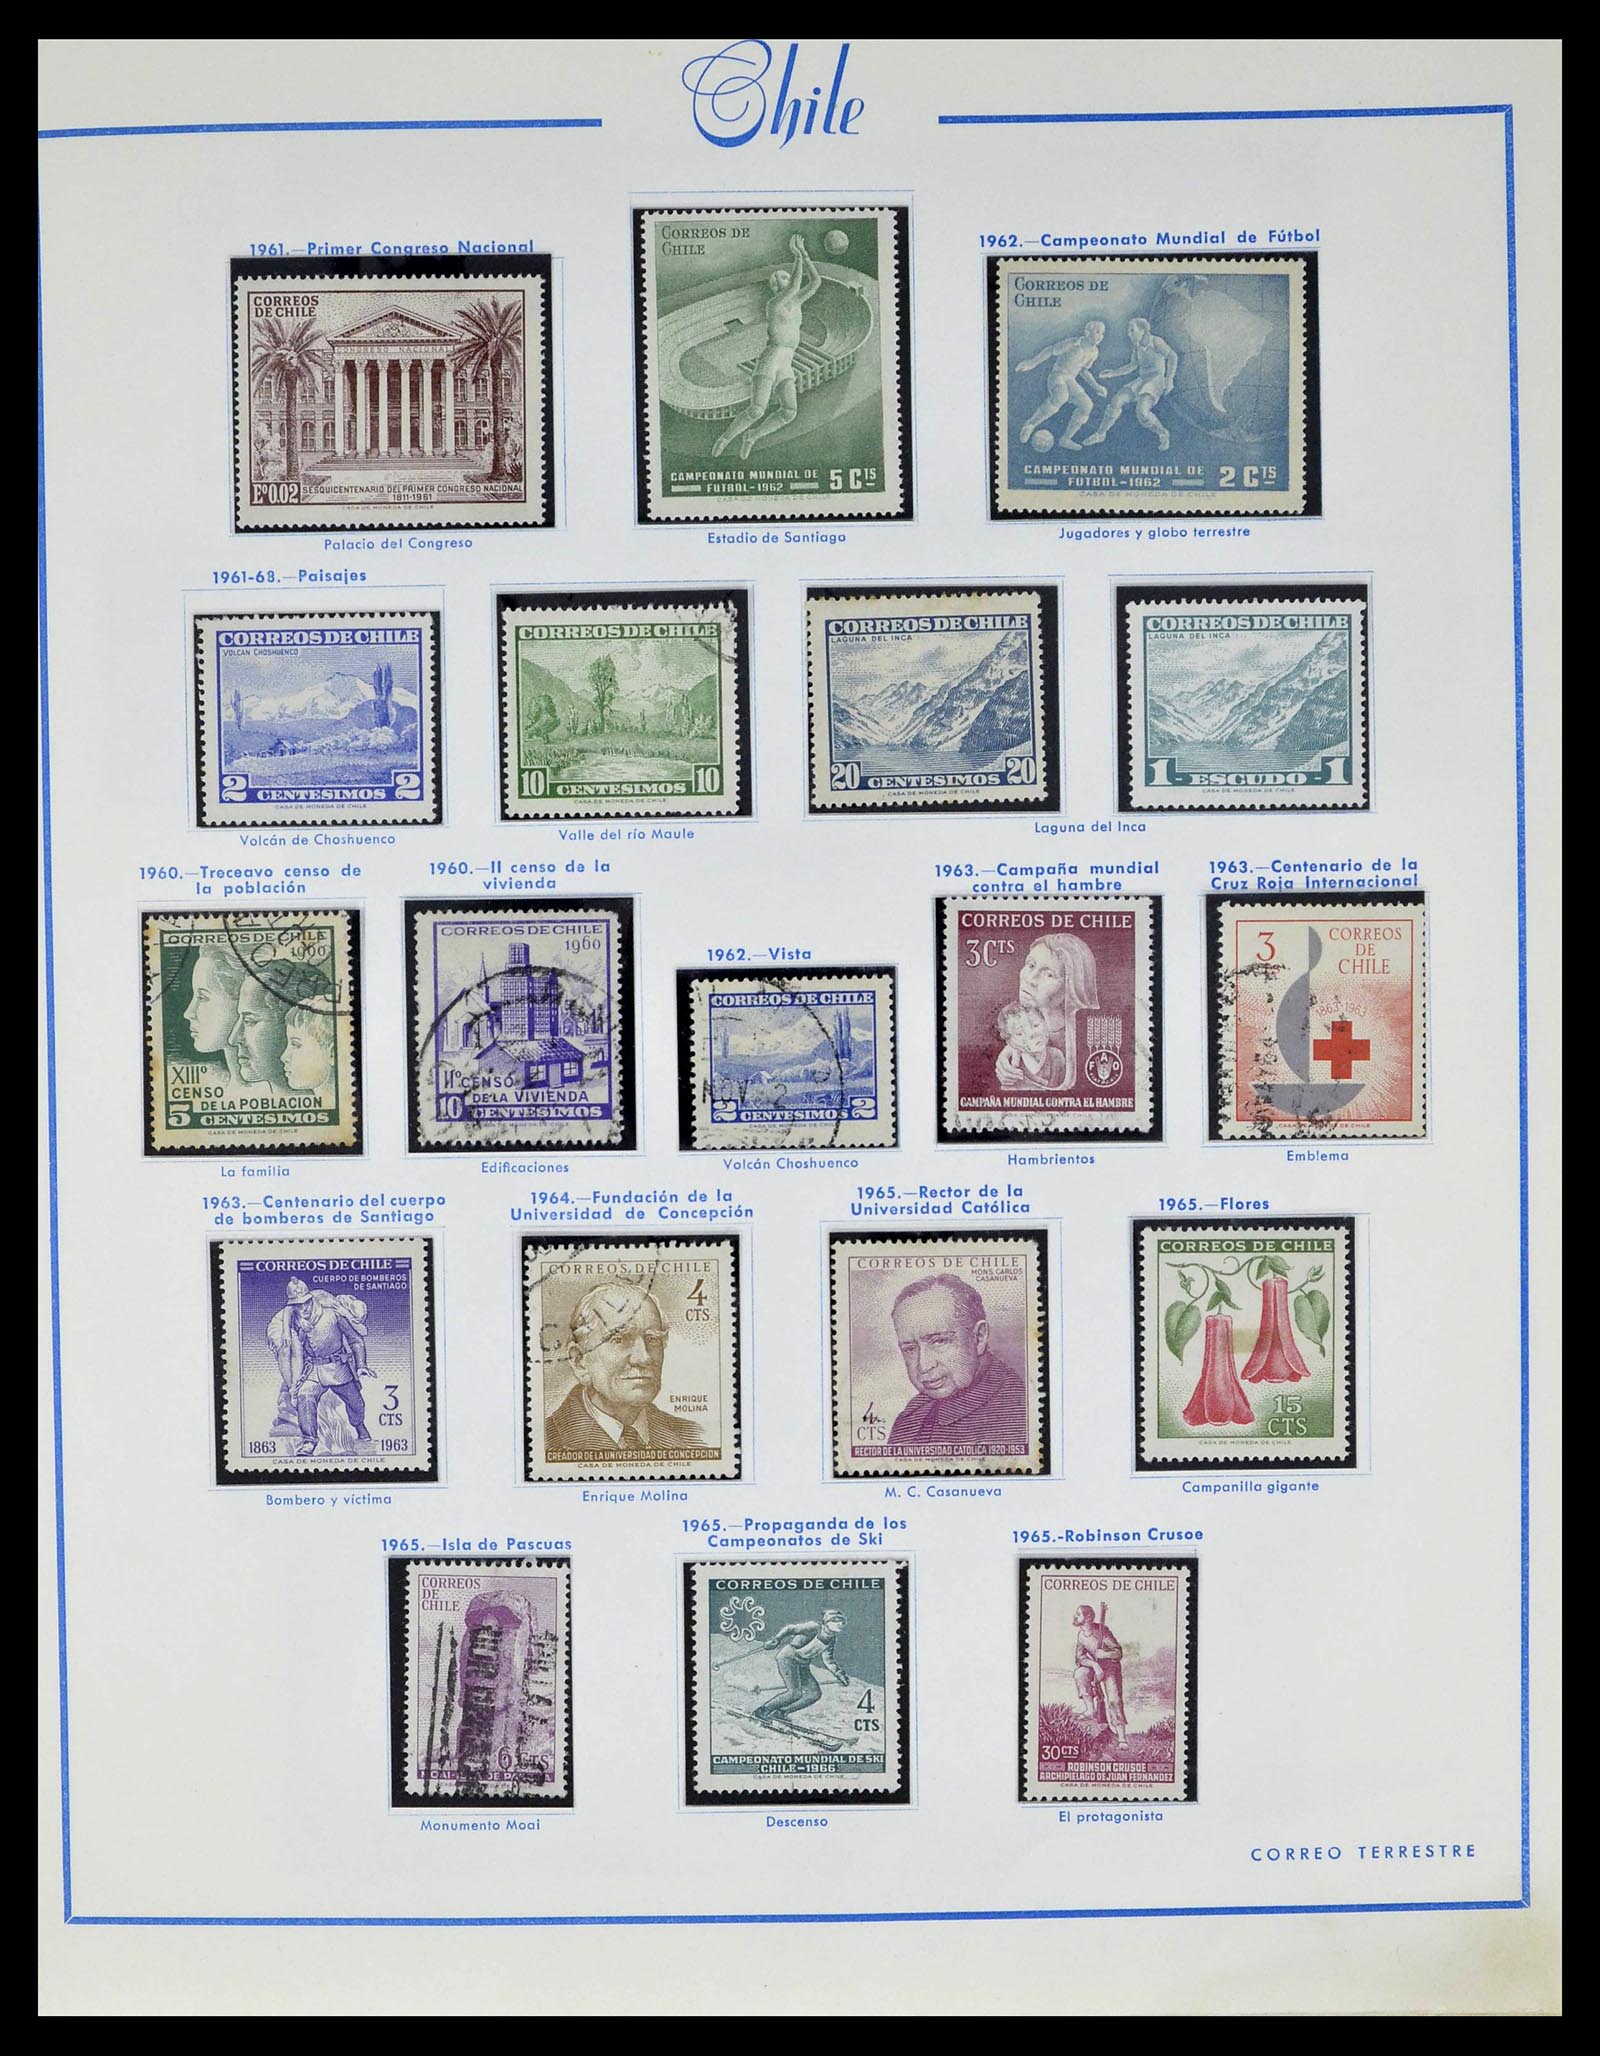 39213 0020 - Stamp collection 39213 Chile 1853-1970.